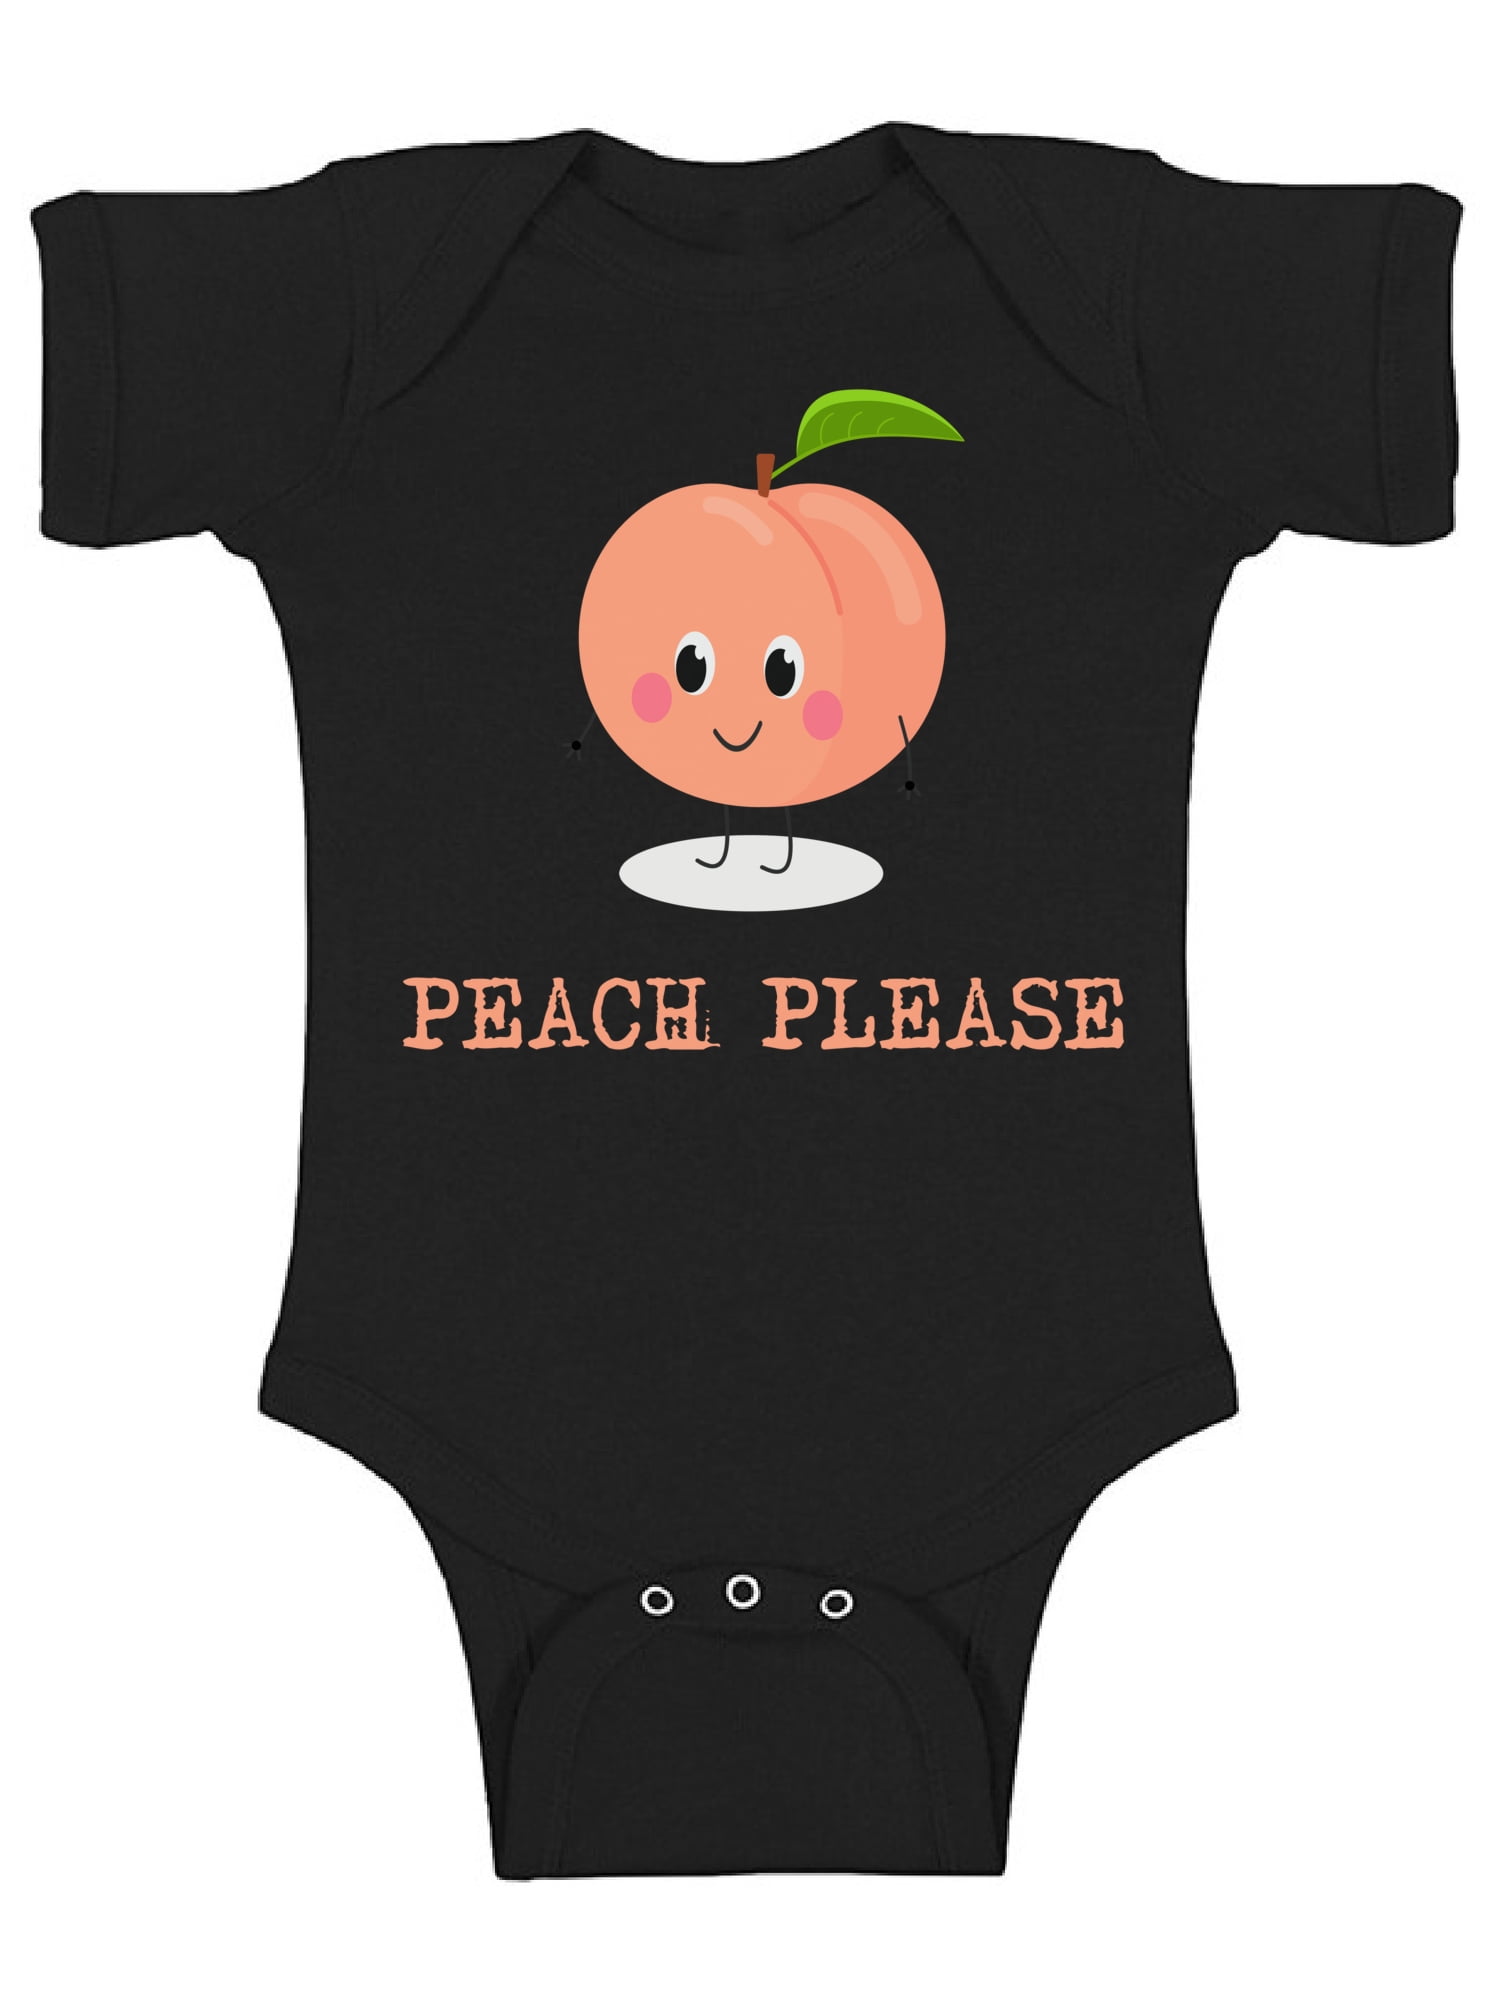 peach baby outfit